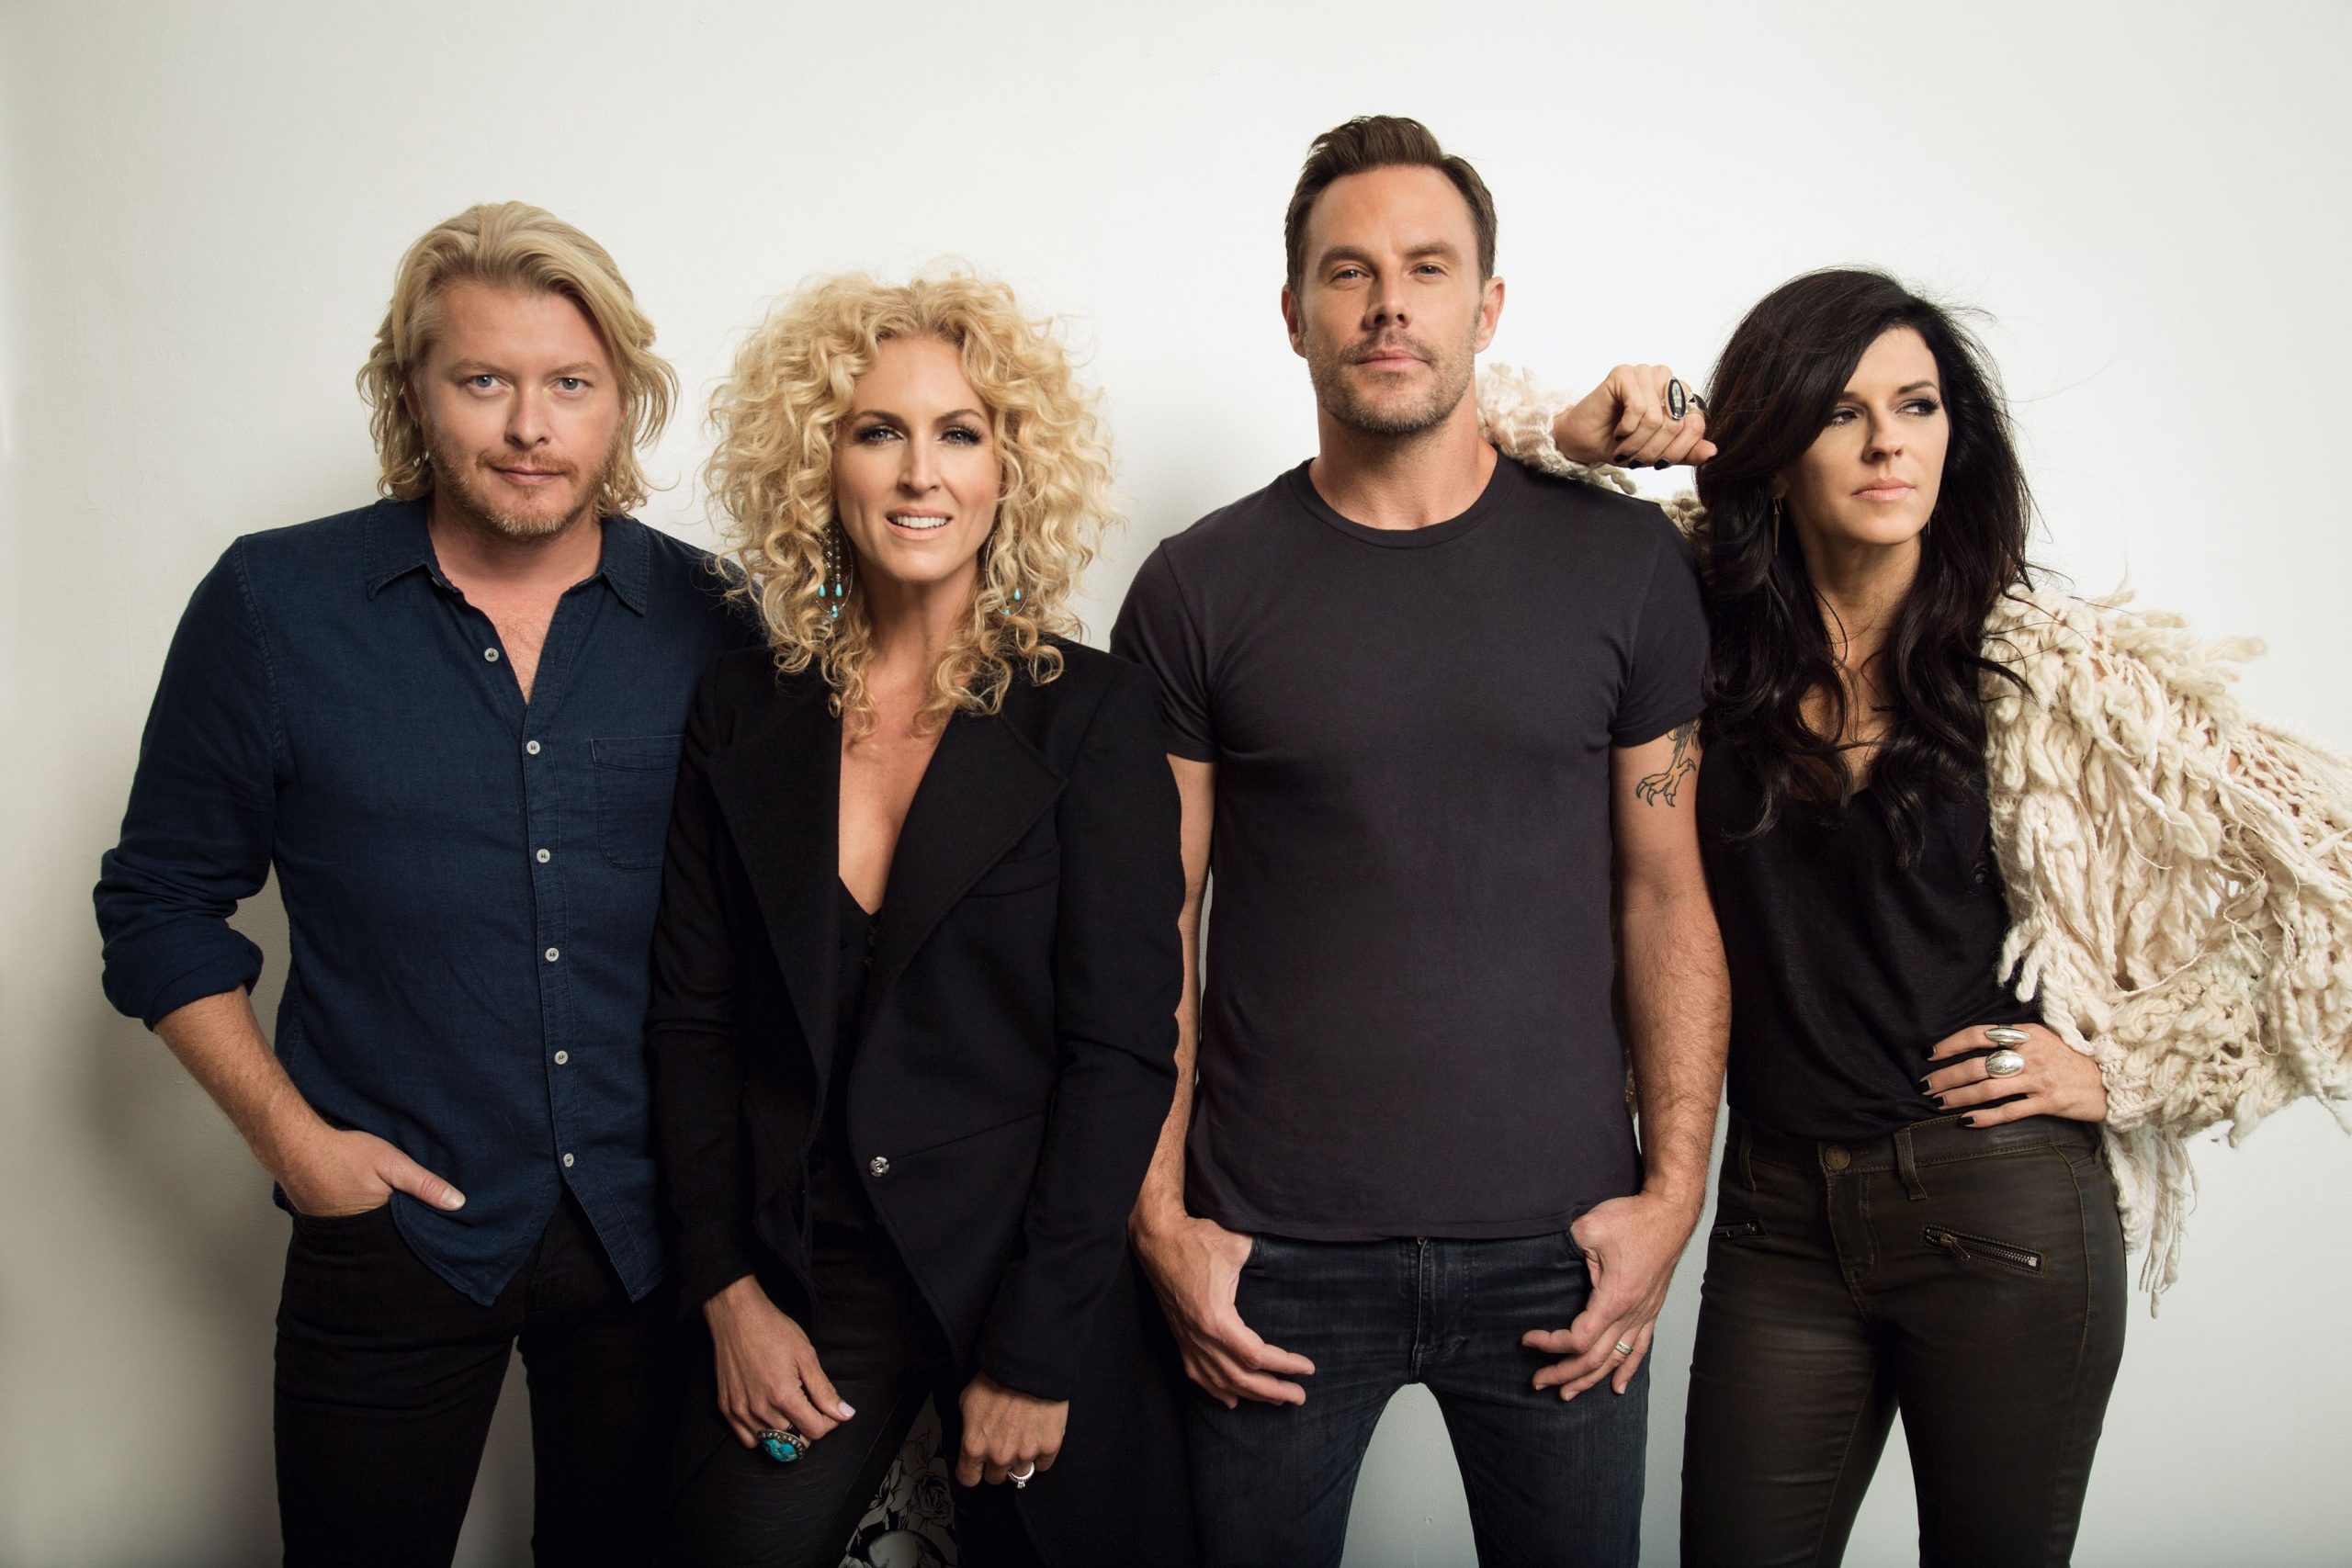 LITTLE BIG TOWN STRIKES GOLD WITH NO. 1 “DAY DRINKING”